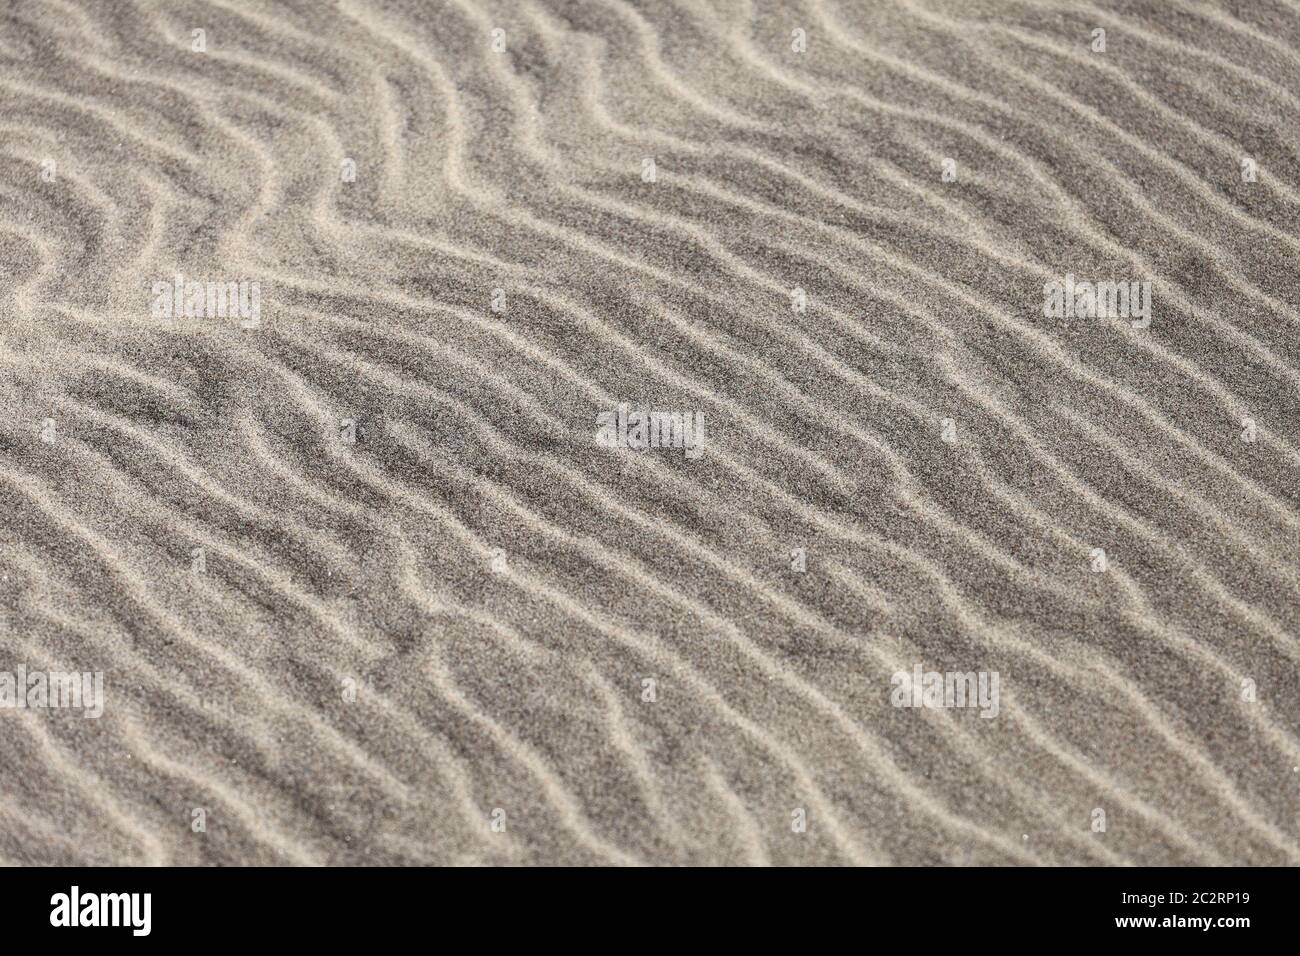 Ripples pattern as seen in sand on a beach. Stock Photo